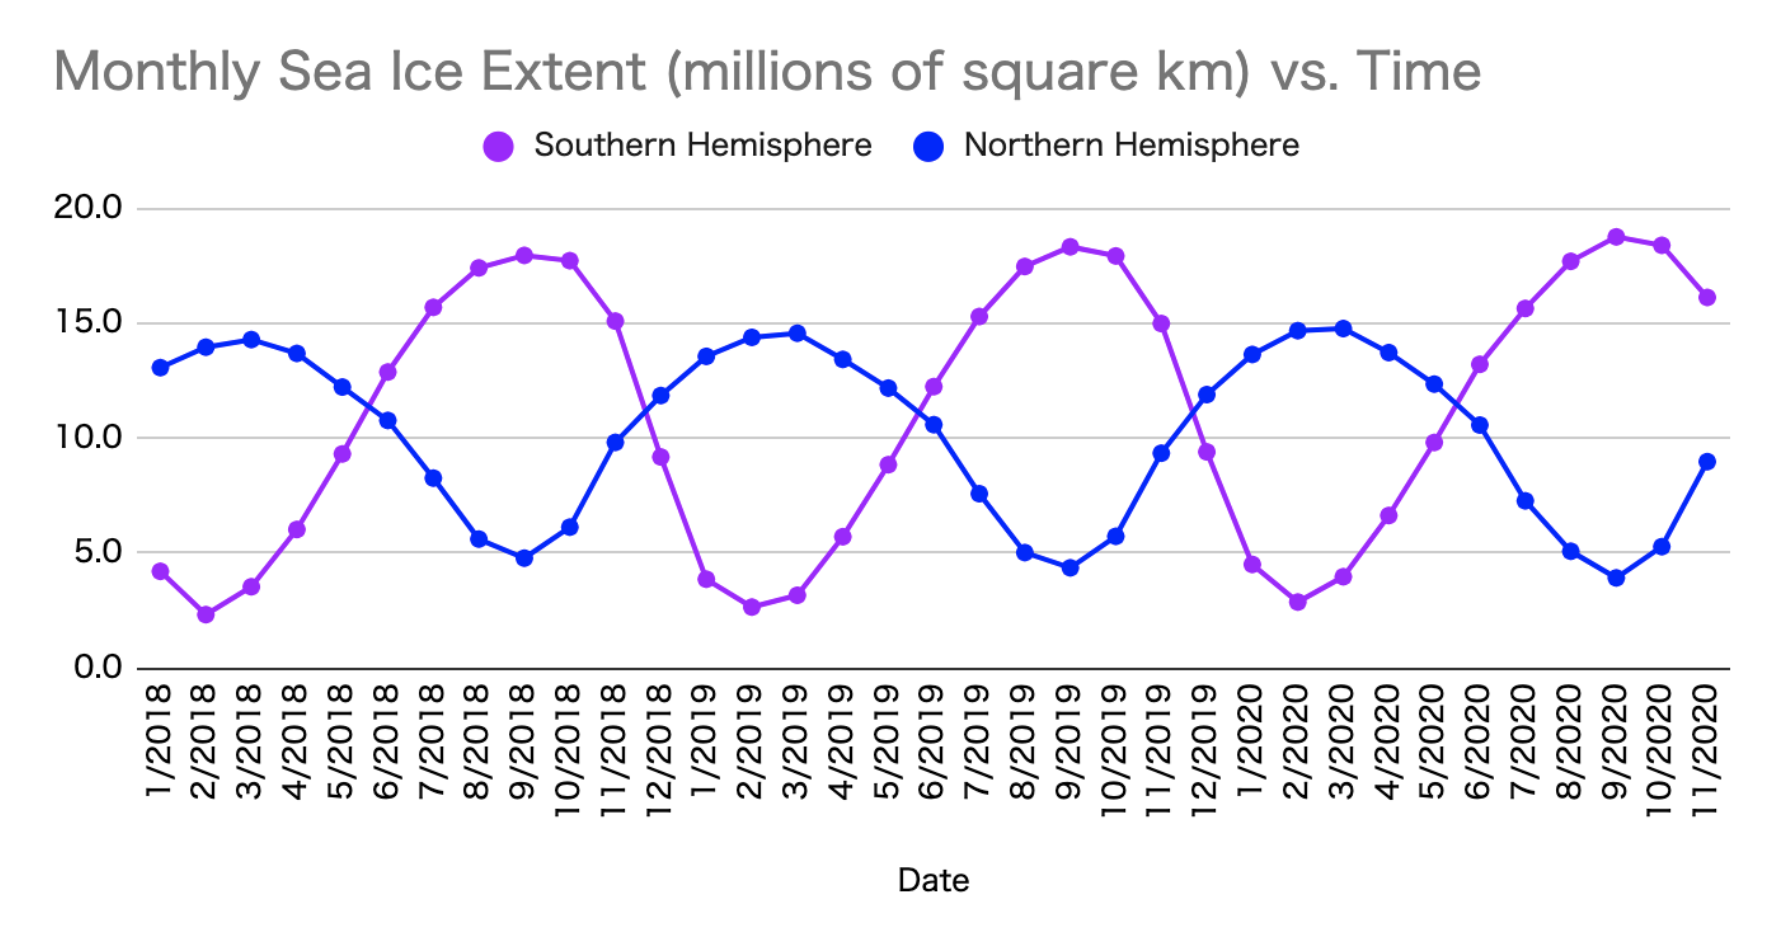 Combined N. and S. Hemisphere Sea Ice Extent